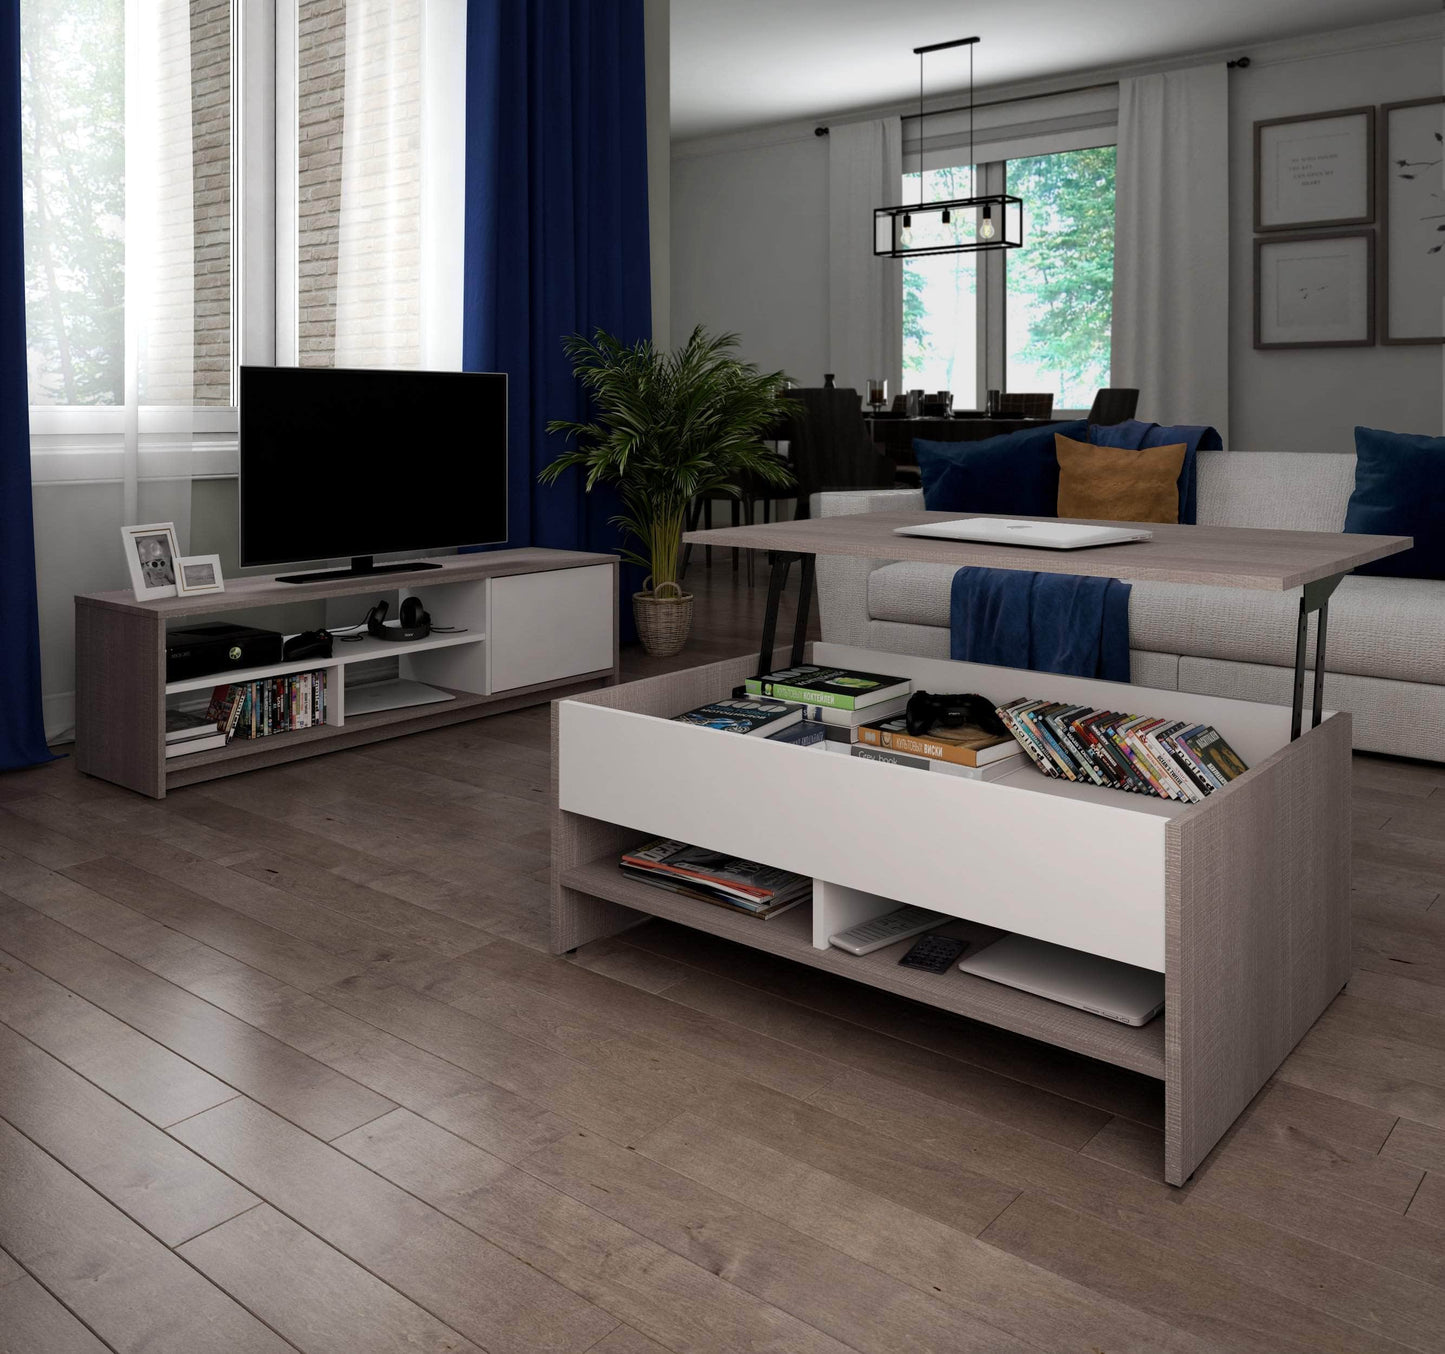 Modubox Coffee Table Small Space 2-Piece Set Including a Lift-Top Coffee Table and a TV Stand - Available in 2 Colours